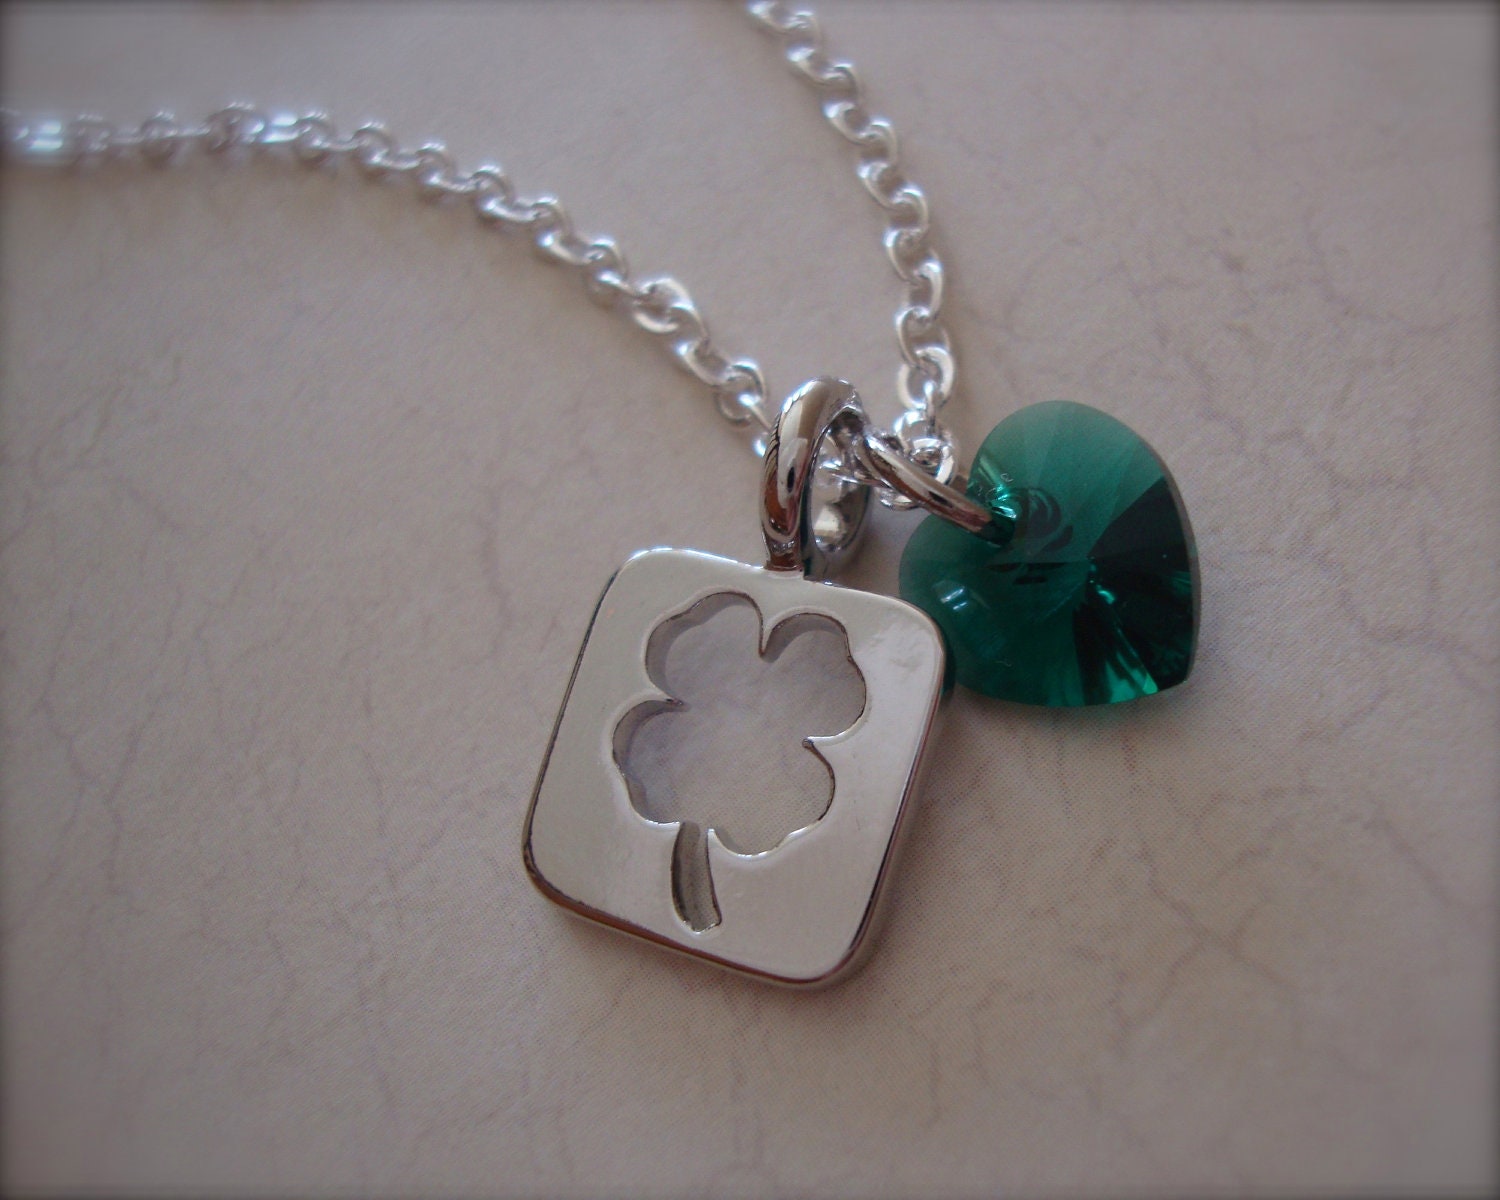 ONE DIRECTION - I Heart Niall - Niall Horan Inspired Irish Clover Necklace